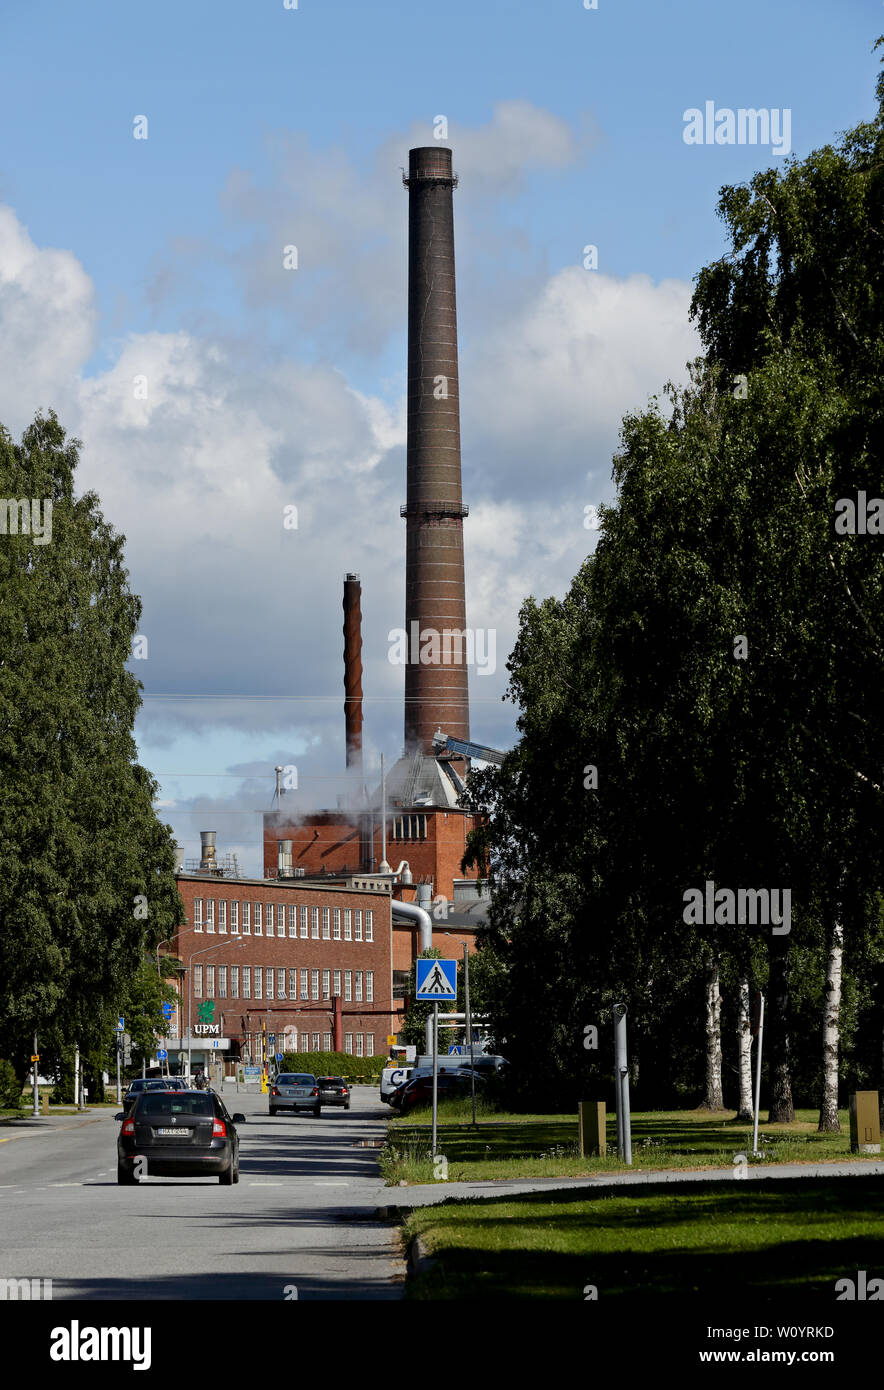 Pori Finland  06/27/2019 A street view with cars and UPM lumber industry. Factory steaming in the end  of the street Stock Photo